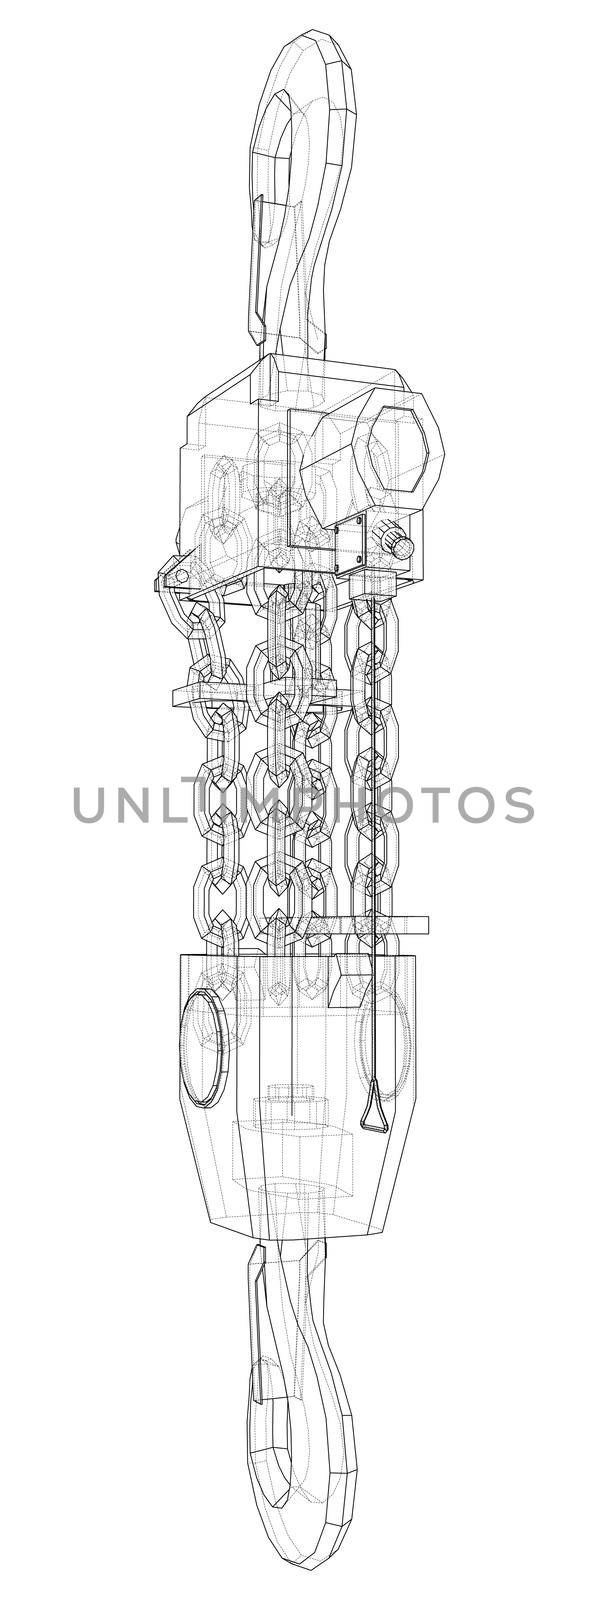 Pneumatic Wire Rope Winch concept outline. 3d illustration